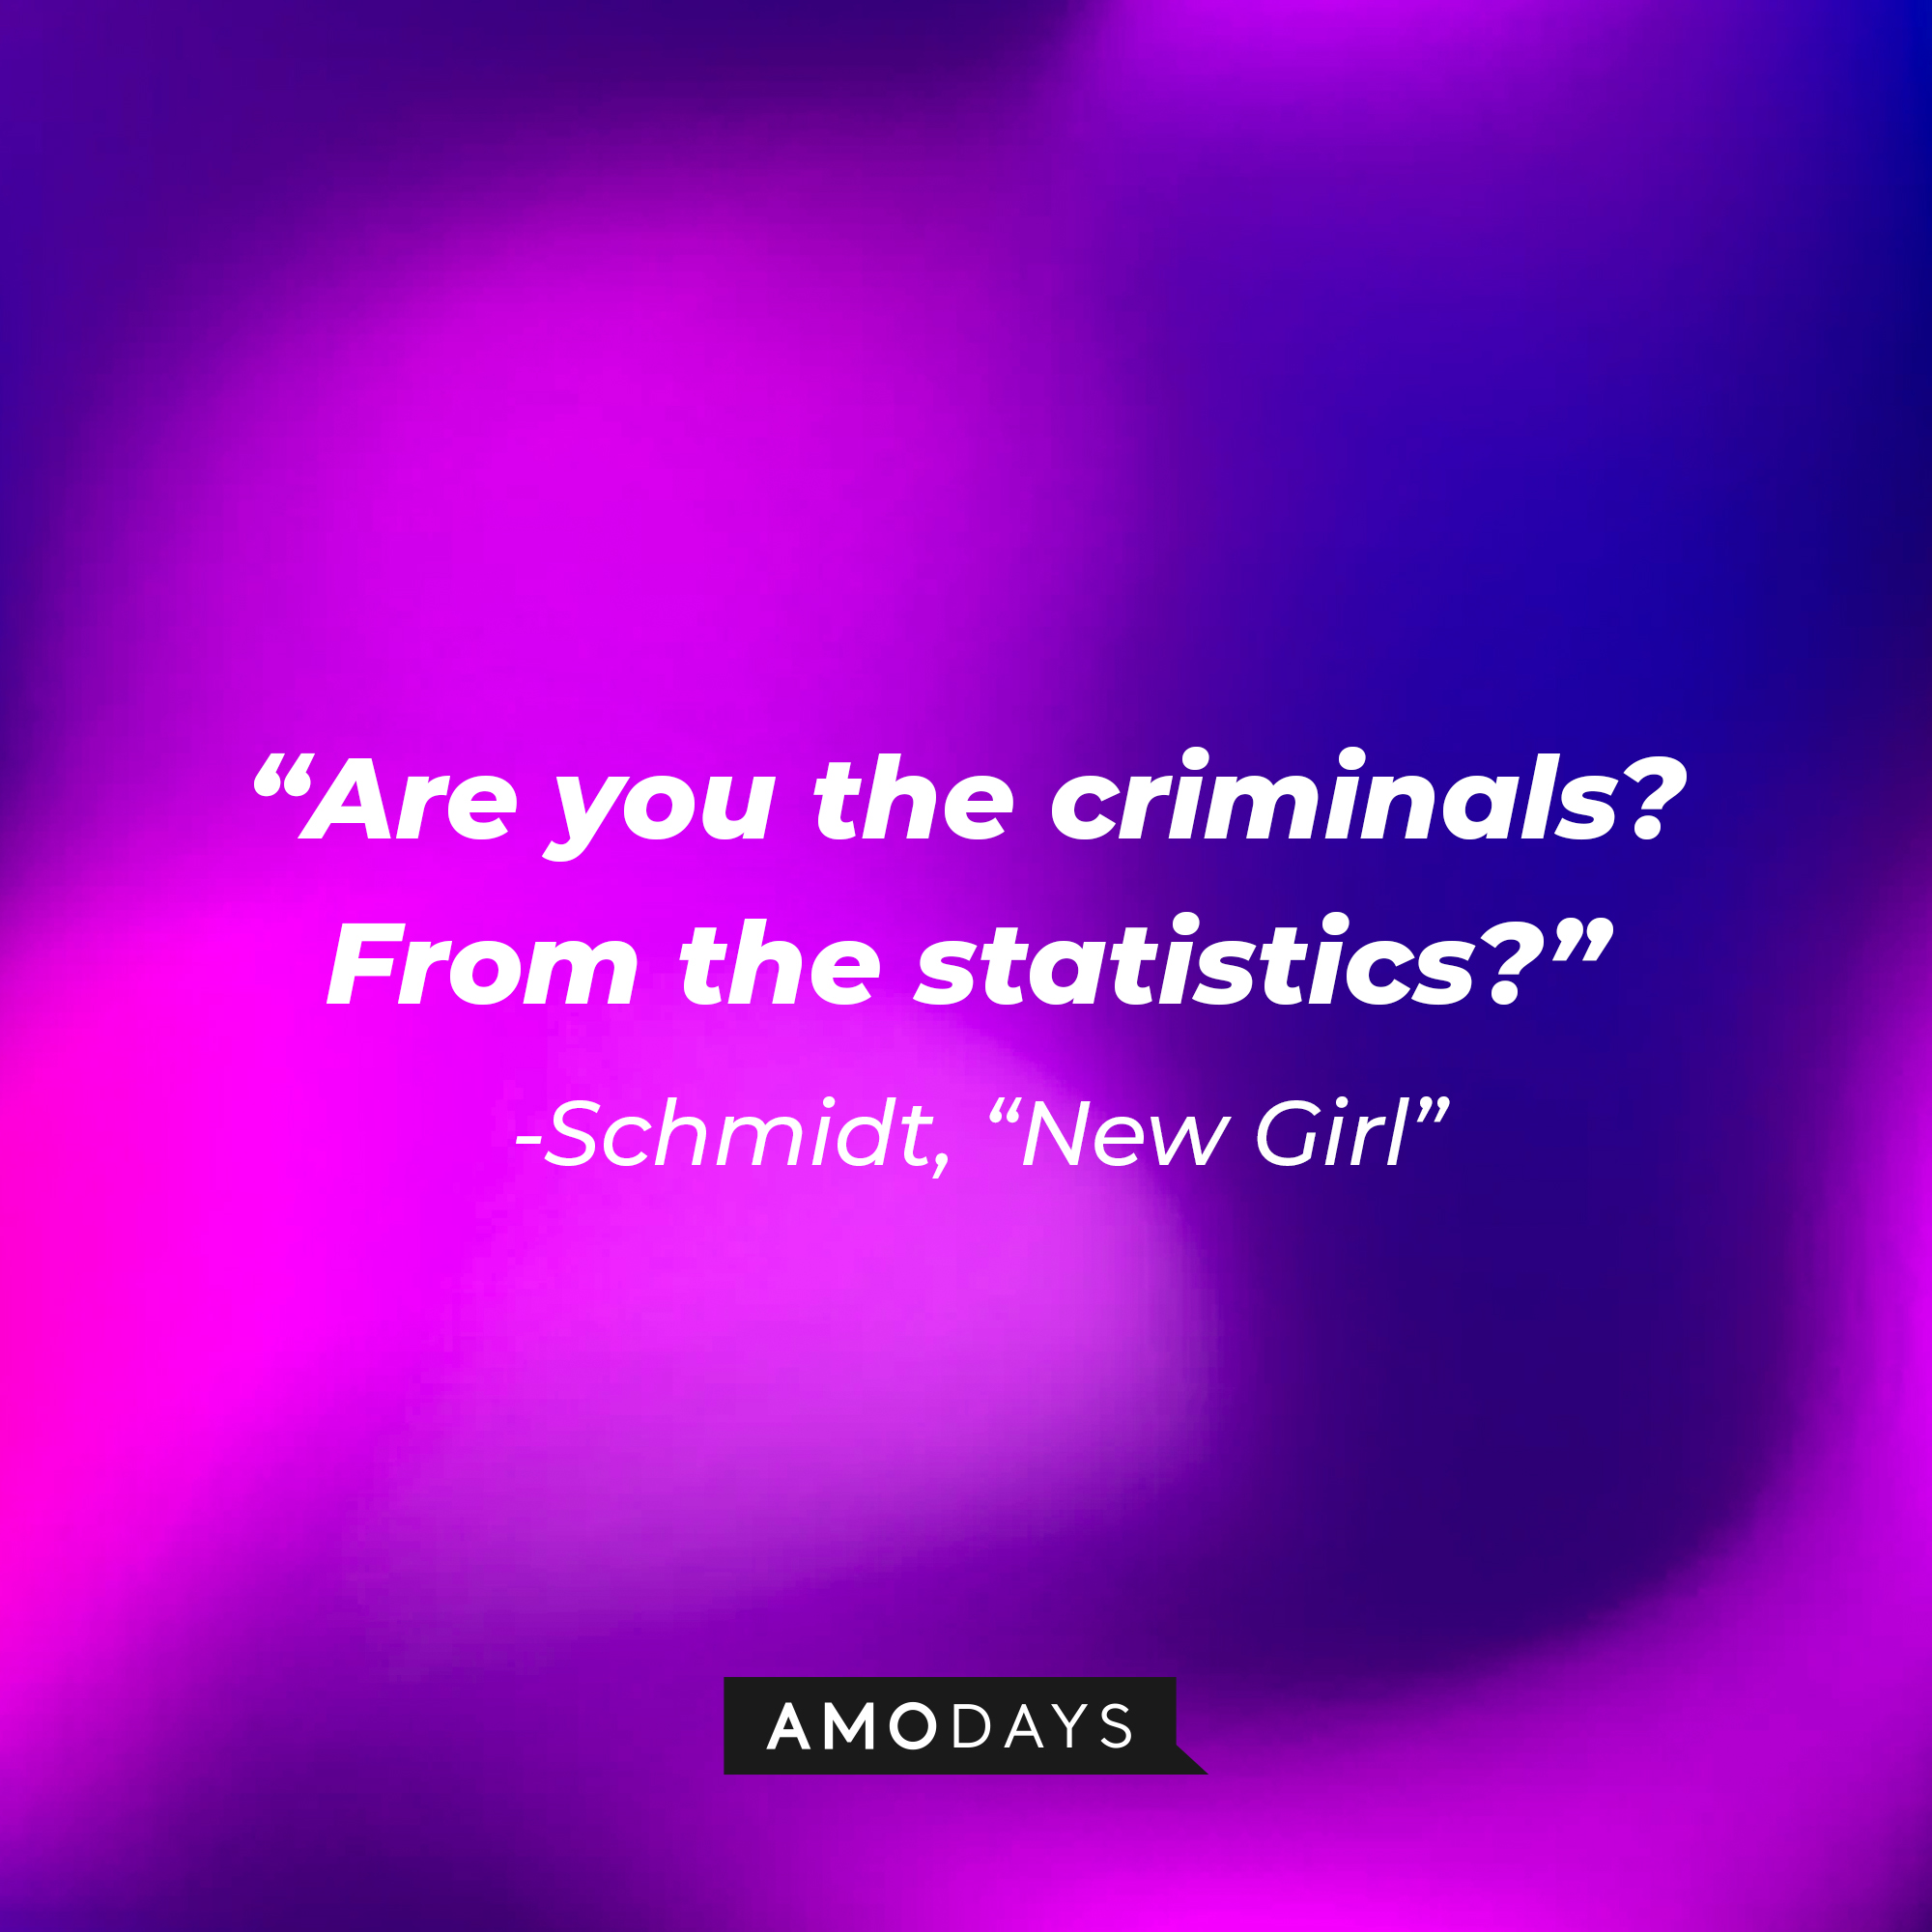 Schmidt's quote: "Are you the criminals? From the statistics?" | Source: Amodays